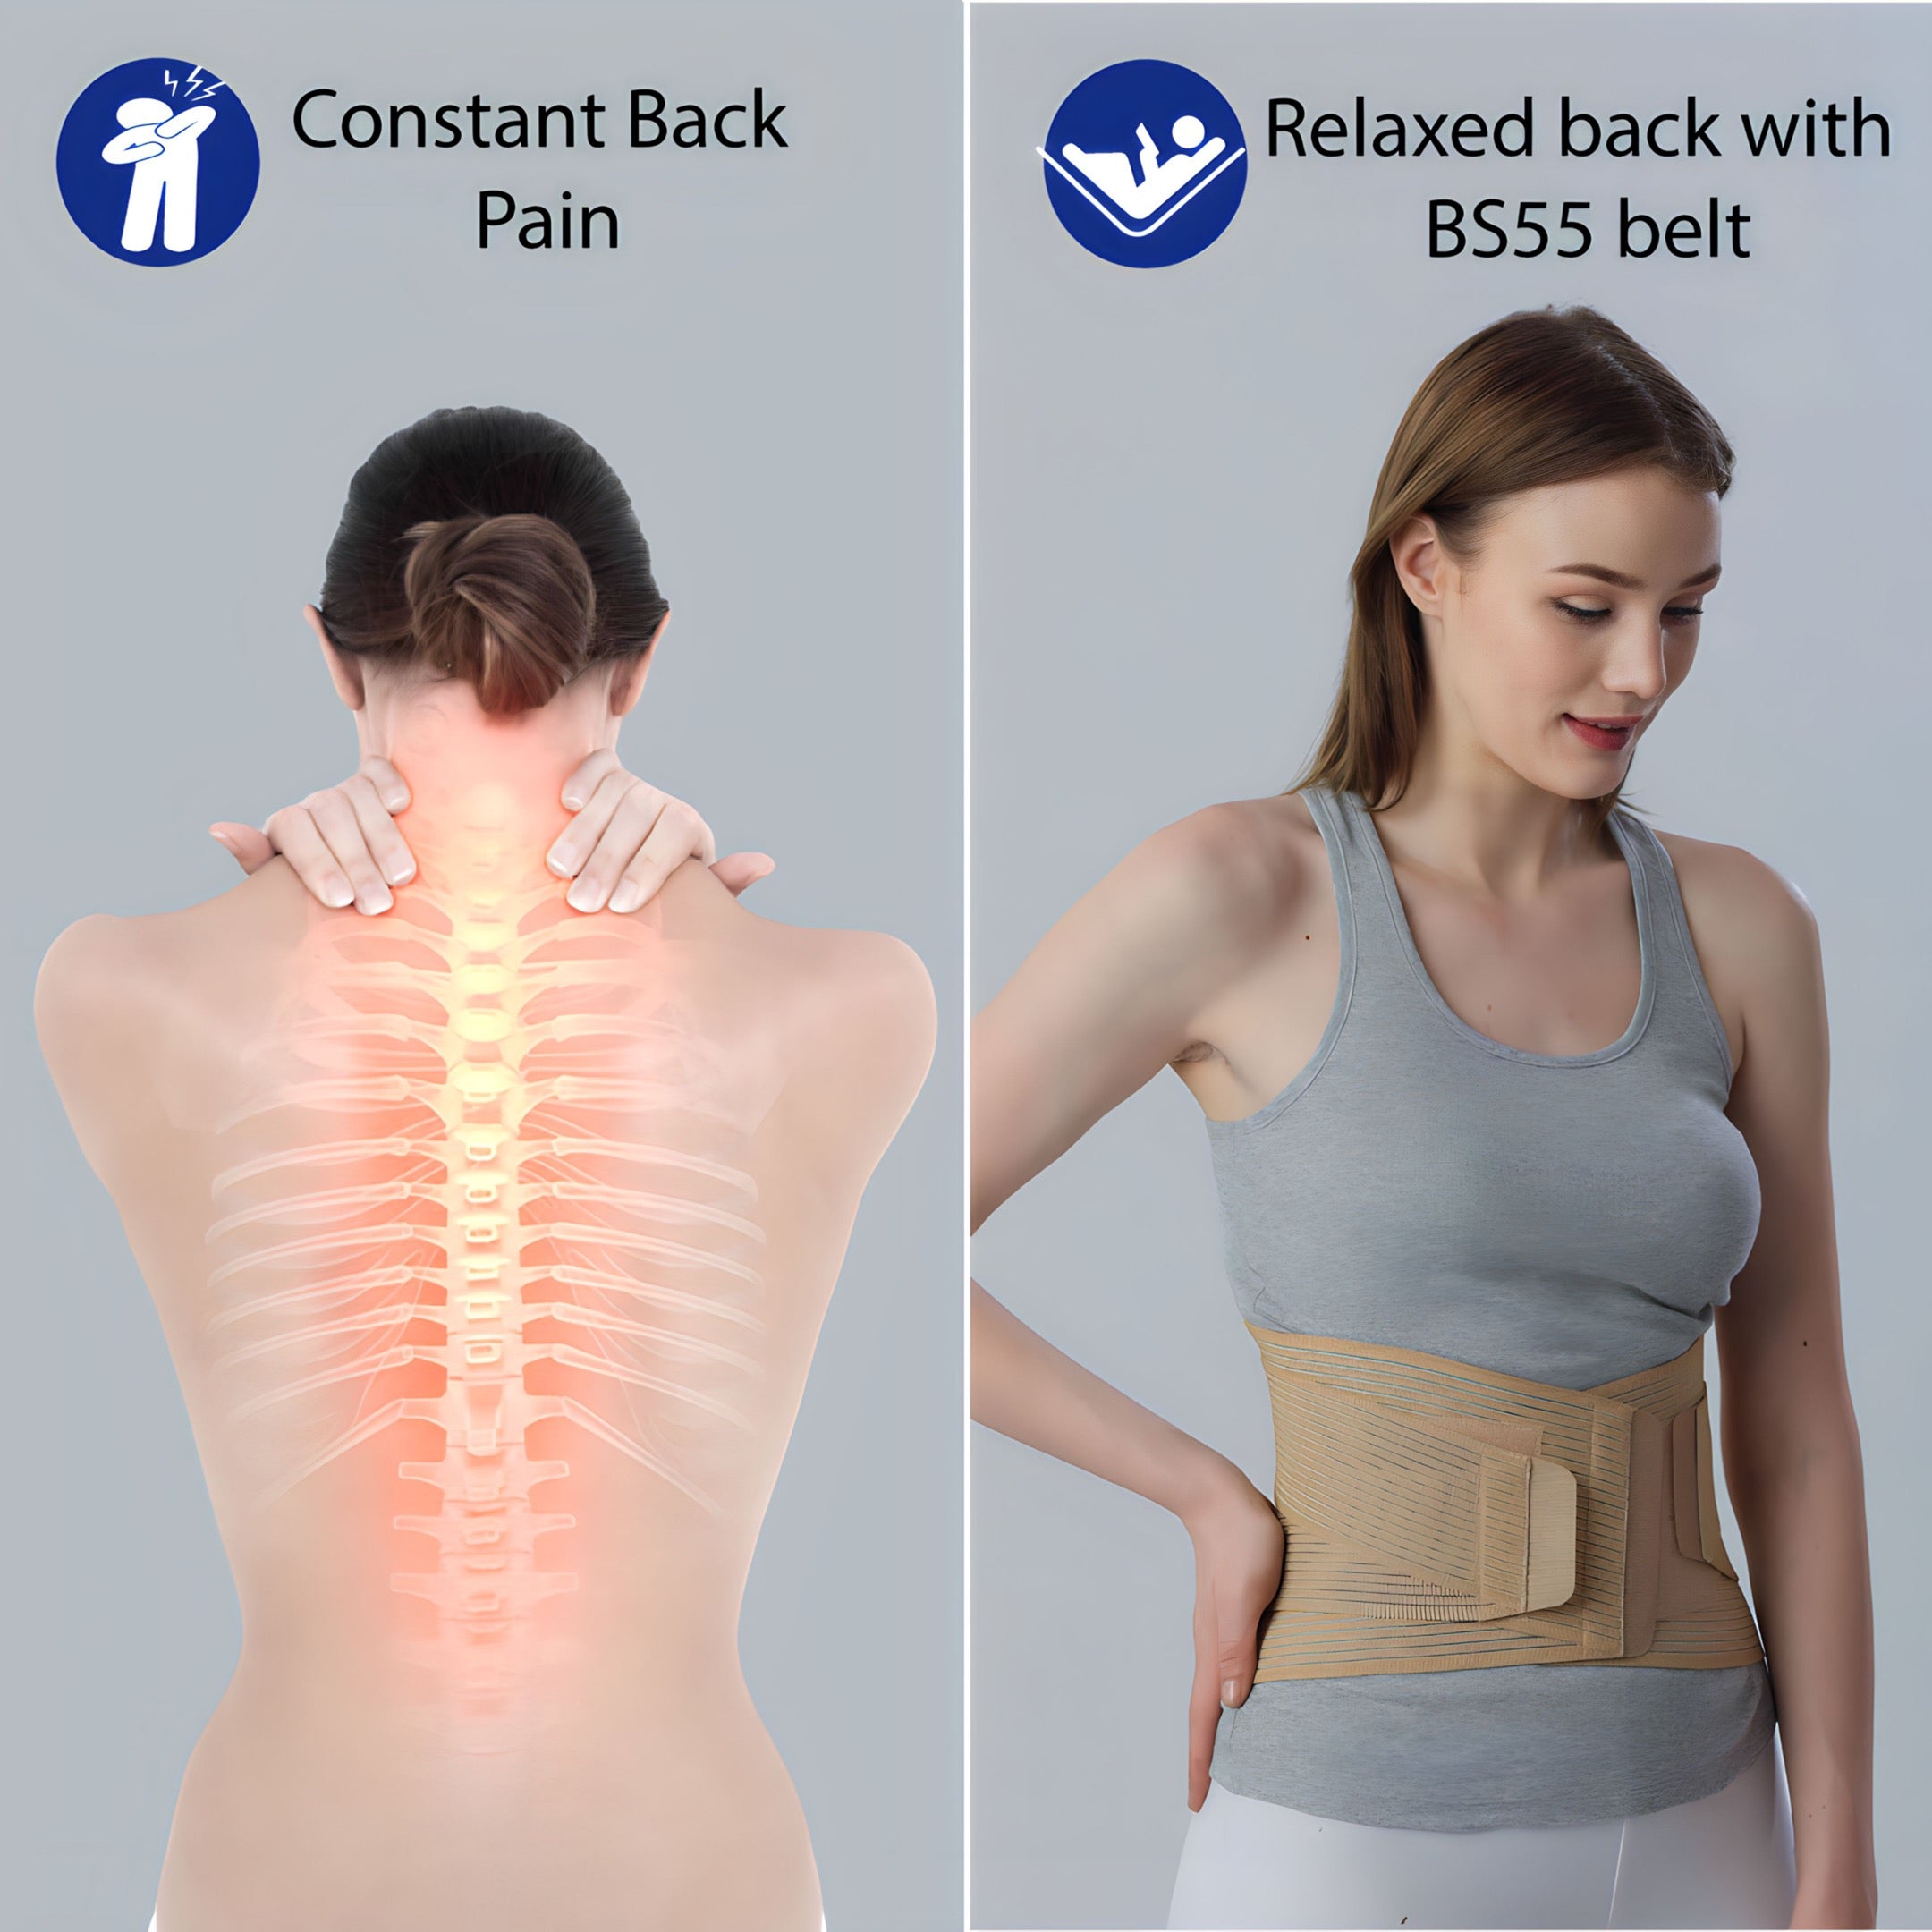 Lumbosacral Corset, Disc Alignment, Spine Posture, Adjustable Front, Tall